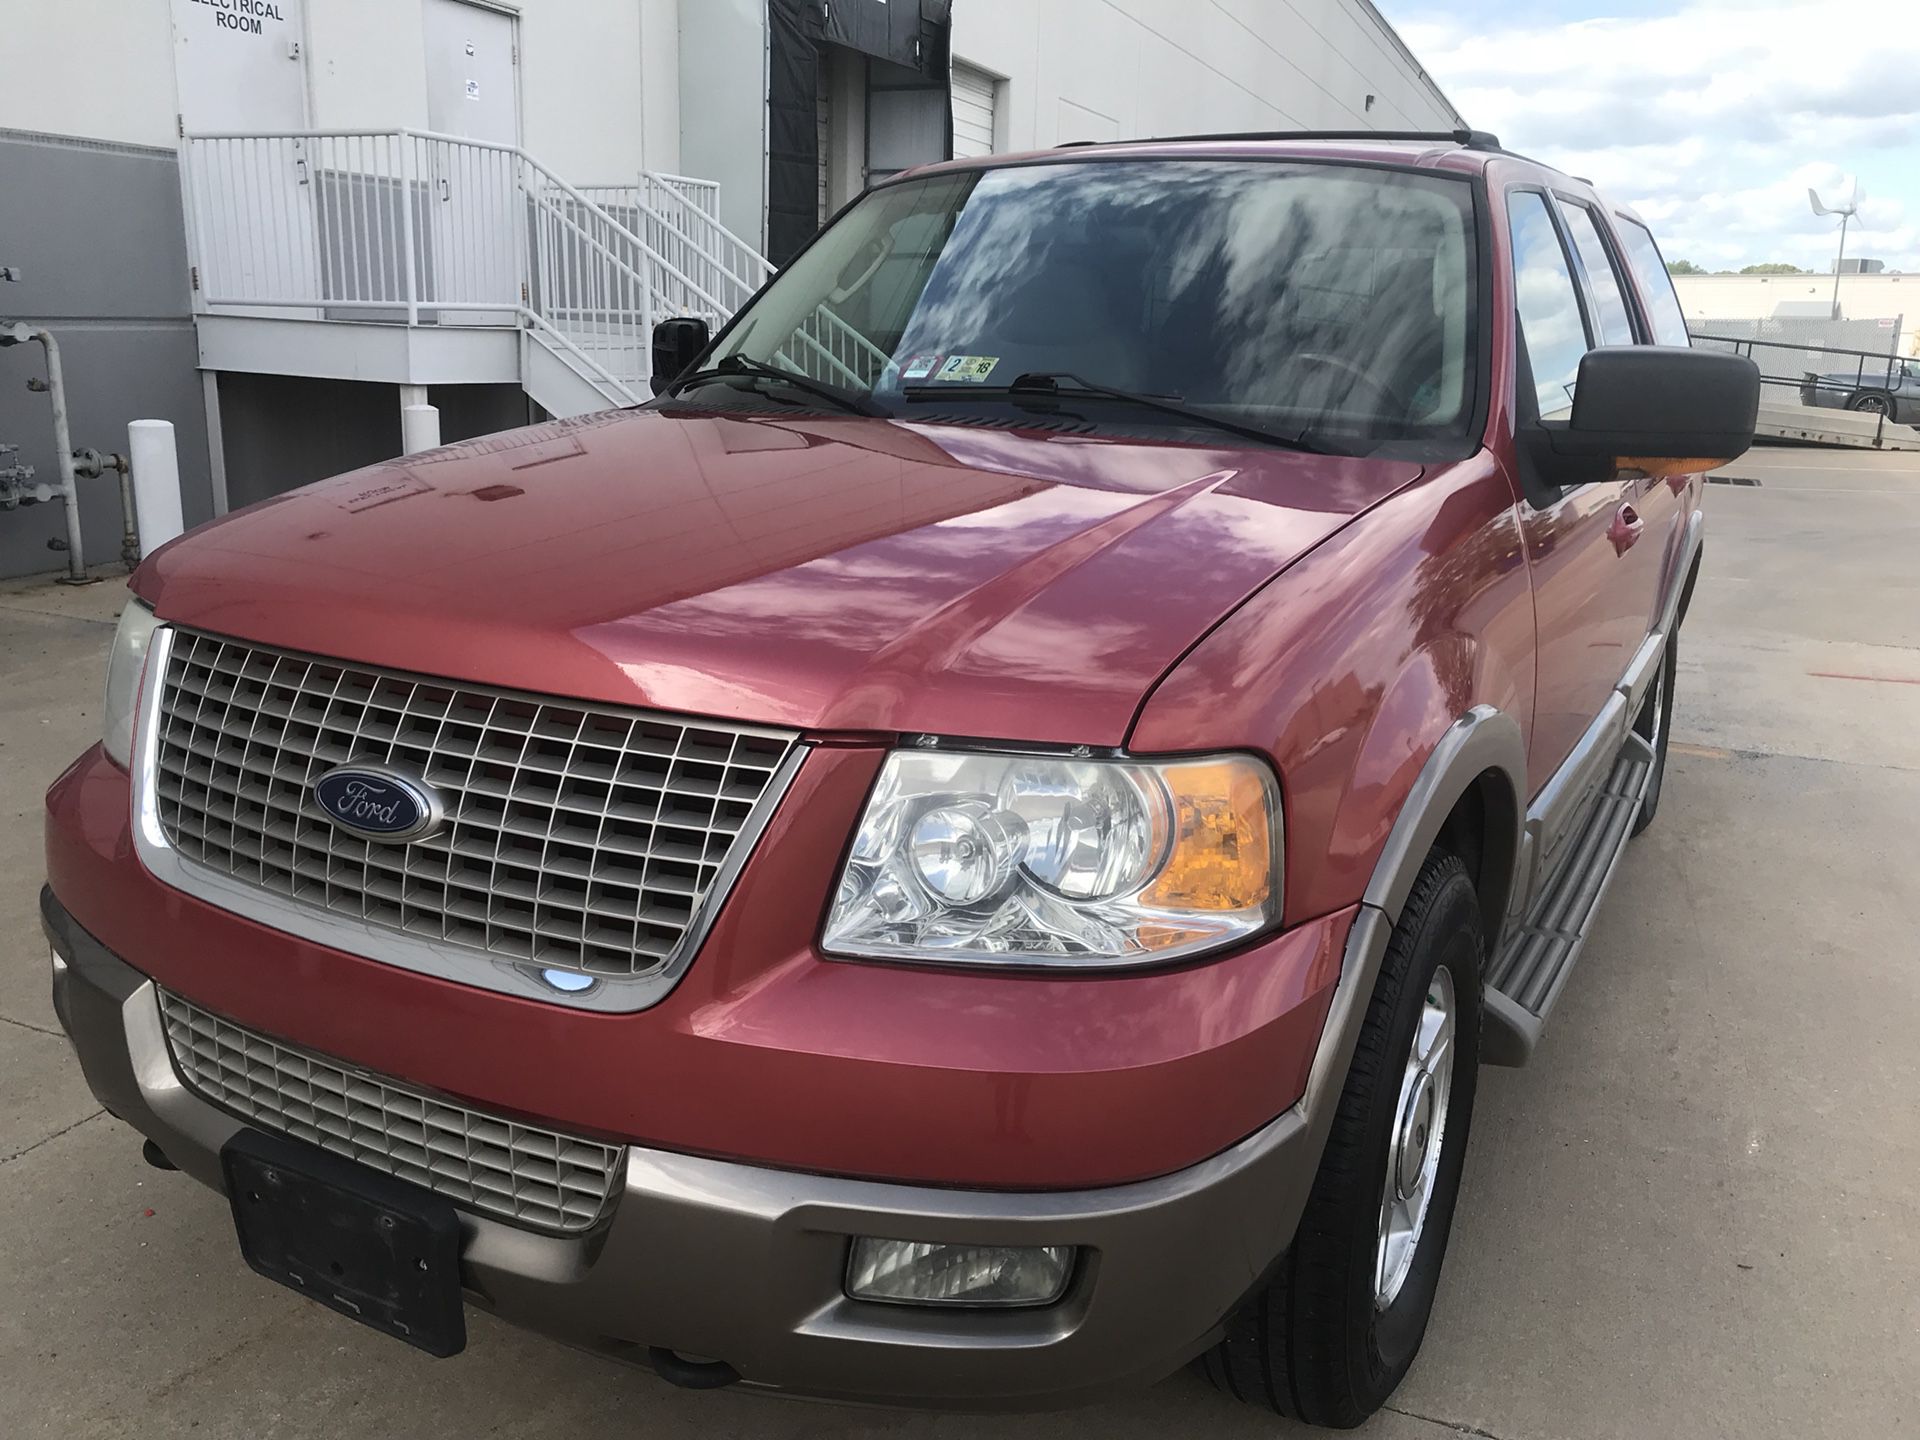 2003 Ford Expedition super clean n perfect 220k miles with dvd system asking 2500